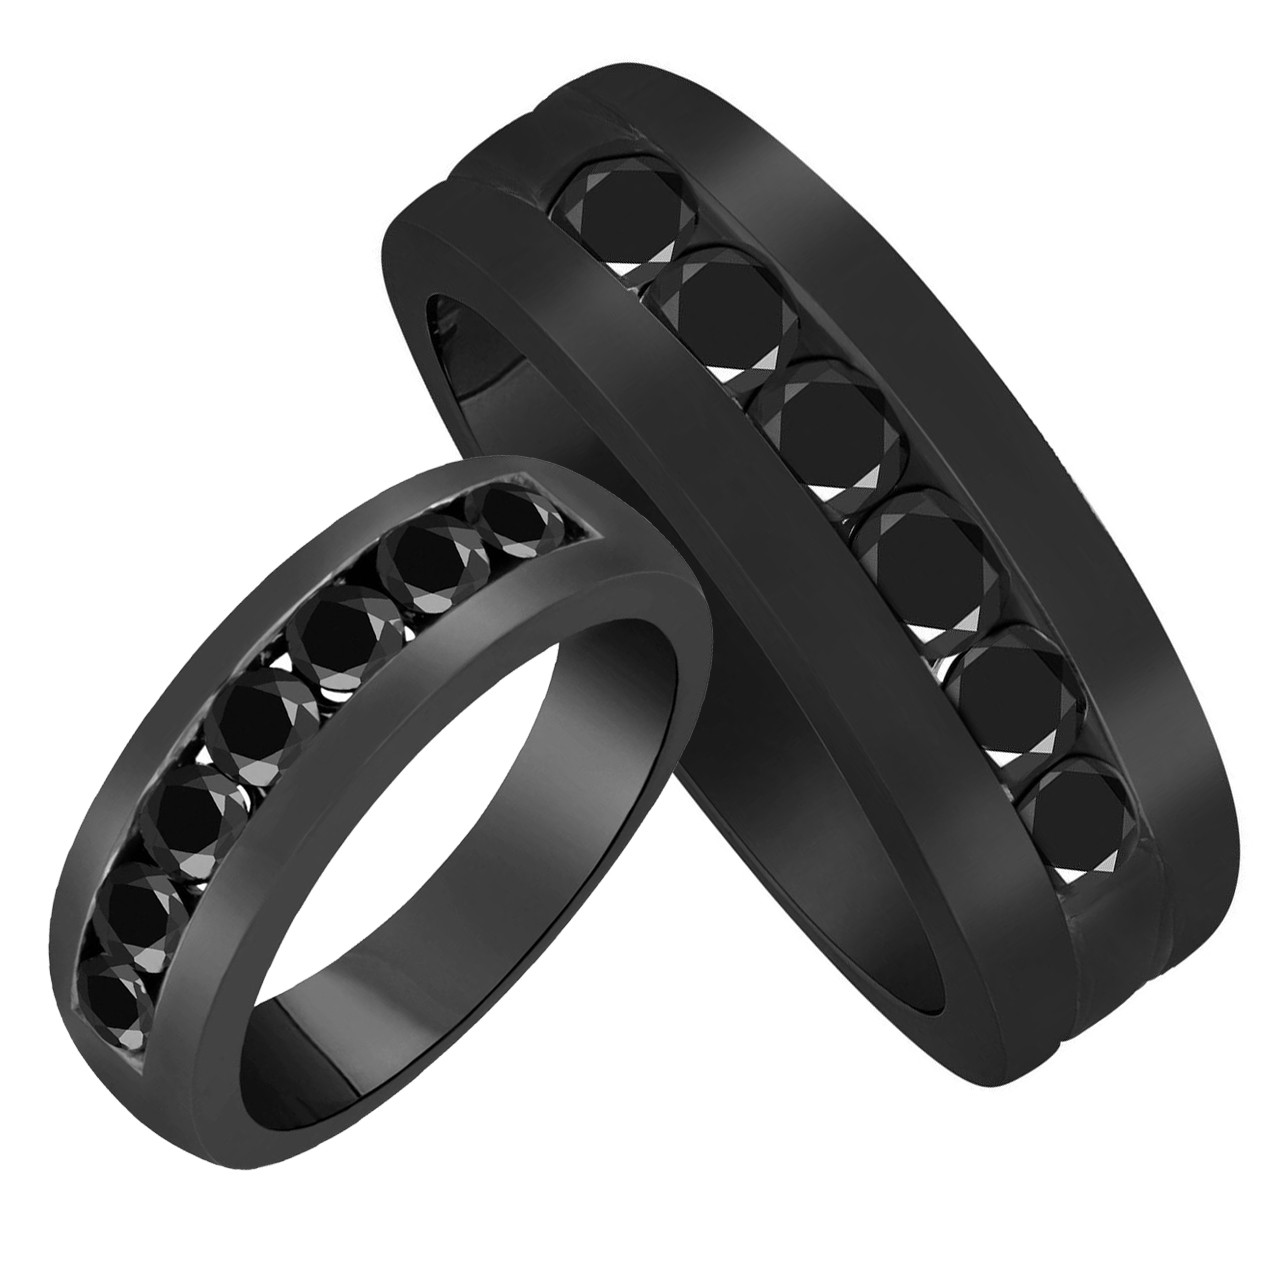 Unique Wedding Ring Sets His And Hers
 3 Carat His and Hers Wedding Bands Unique Black Diamond